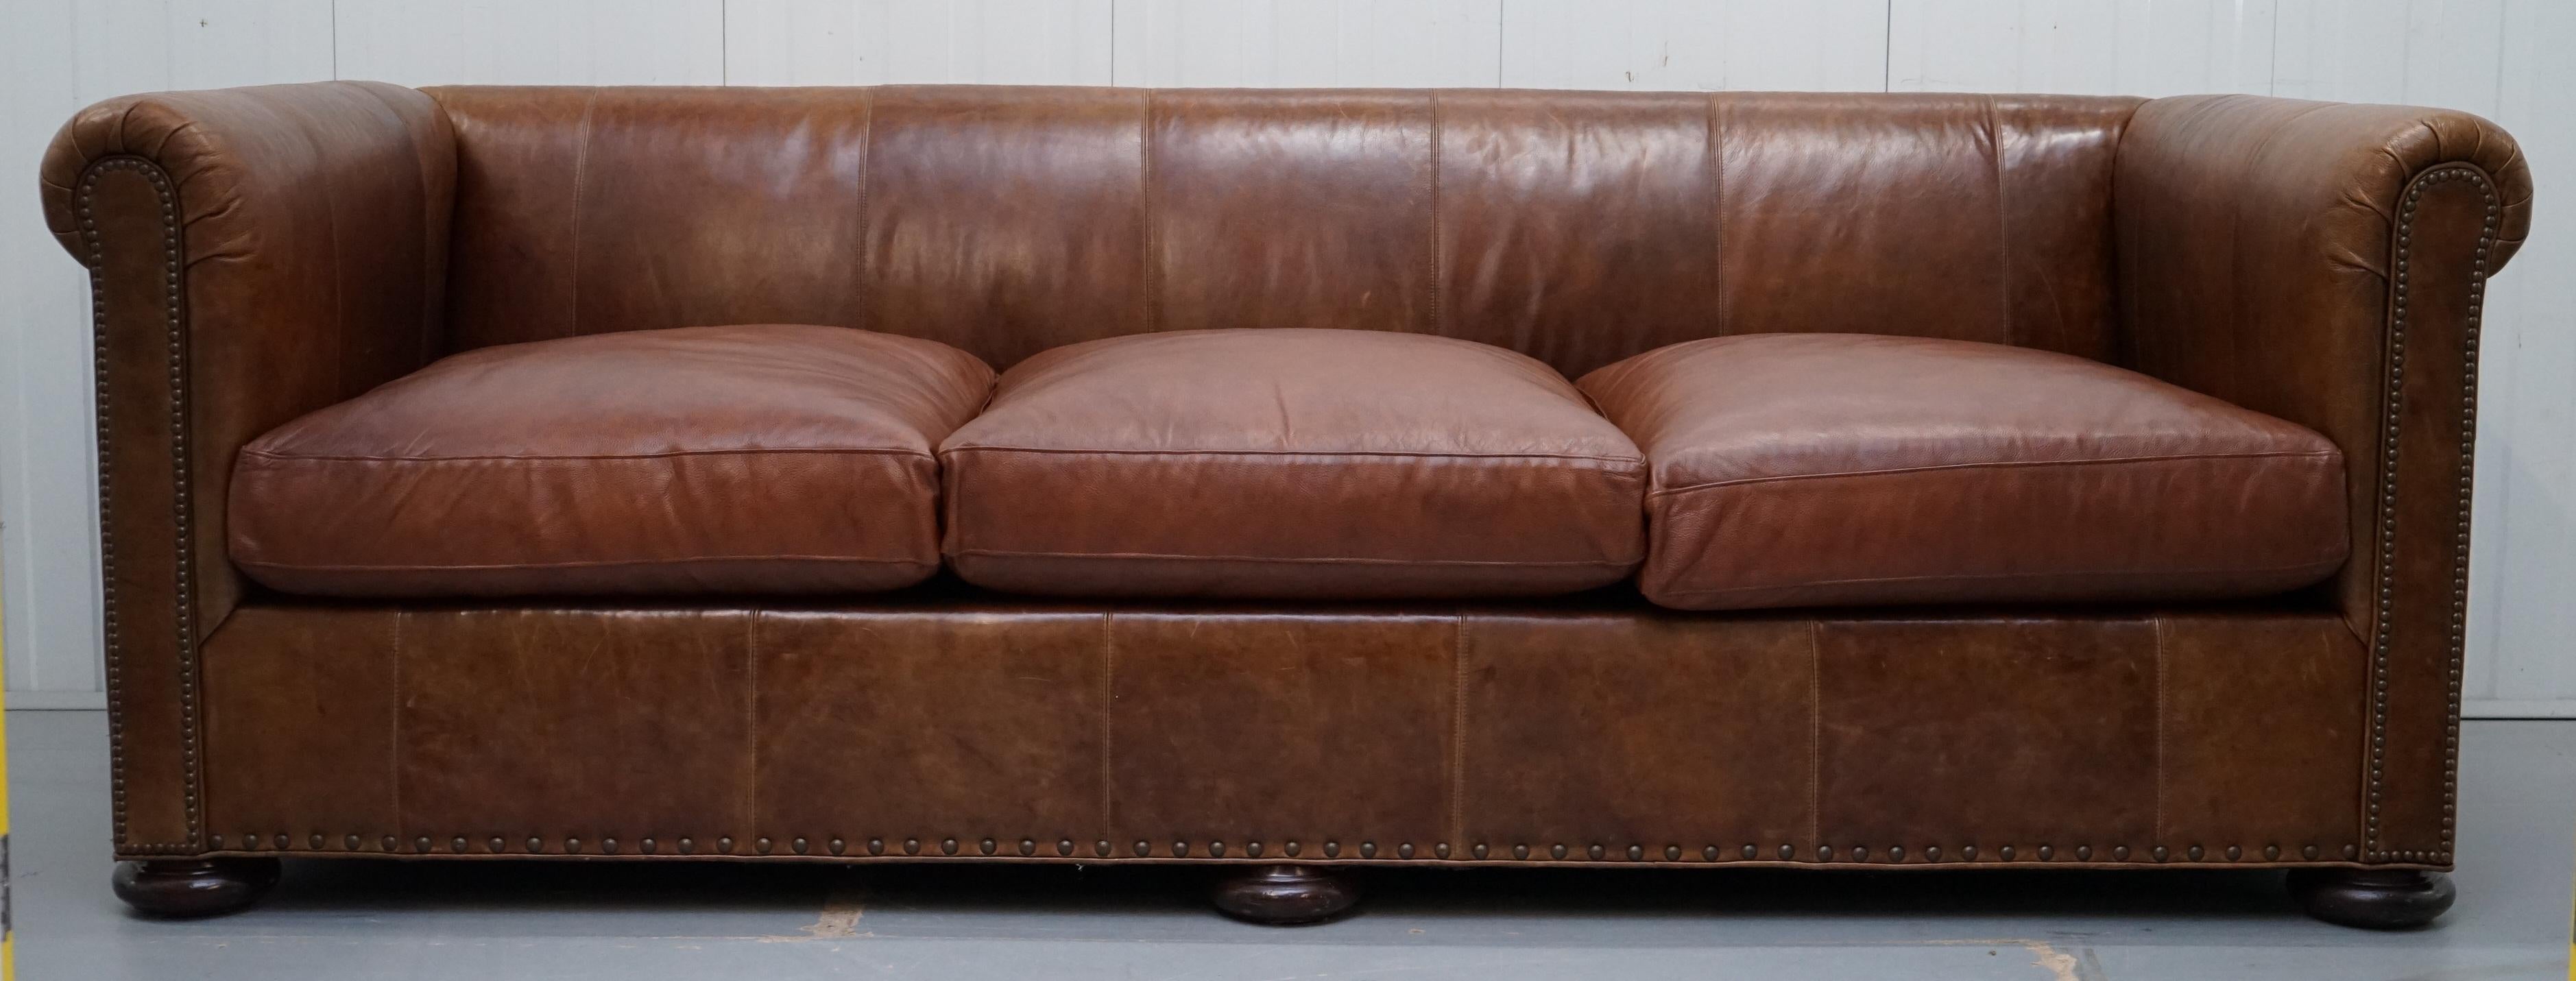 Wimbledon-Furniture is delighted to offer for sale this lovely large grand Lillian August brown leather sofa with split panel feather filled cushions RRP $12,500 

Please note the delivery fee listed is just a guide, it covers within the M25 only,